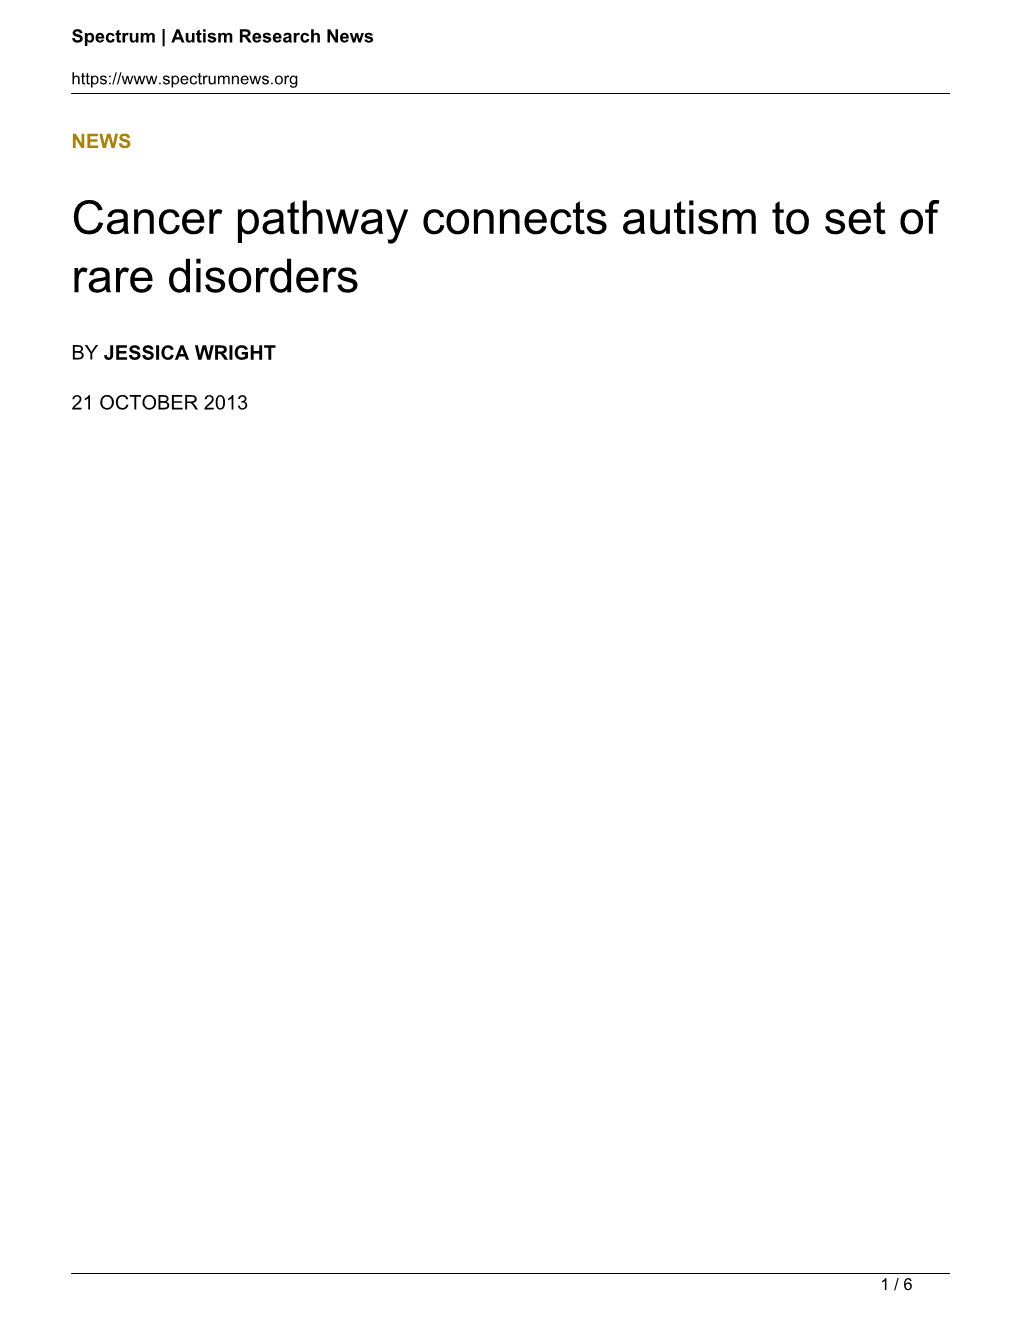 Cancer Pathway Connects Autism to Set of Rare Disorders